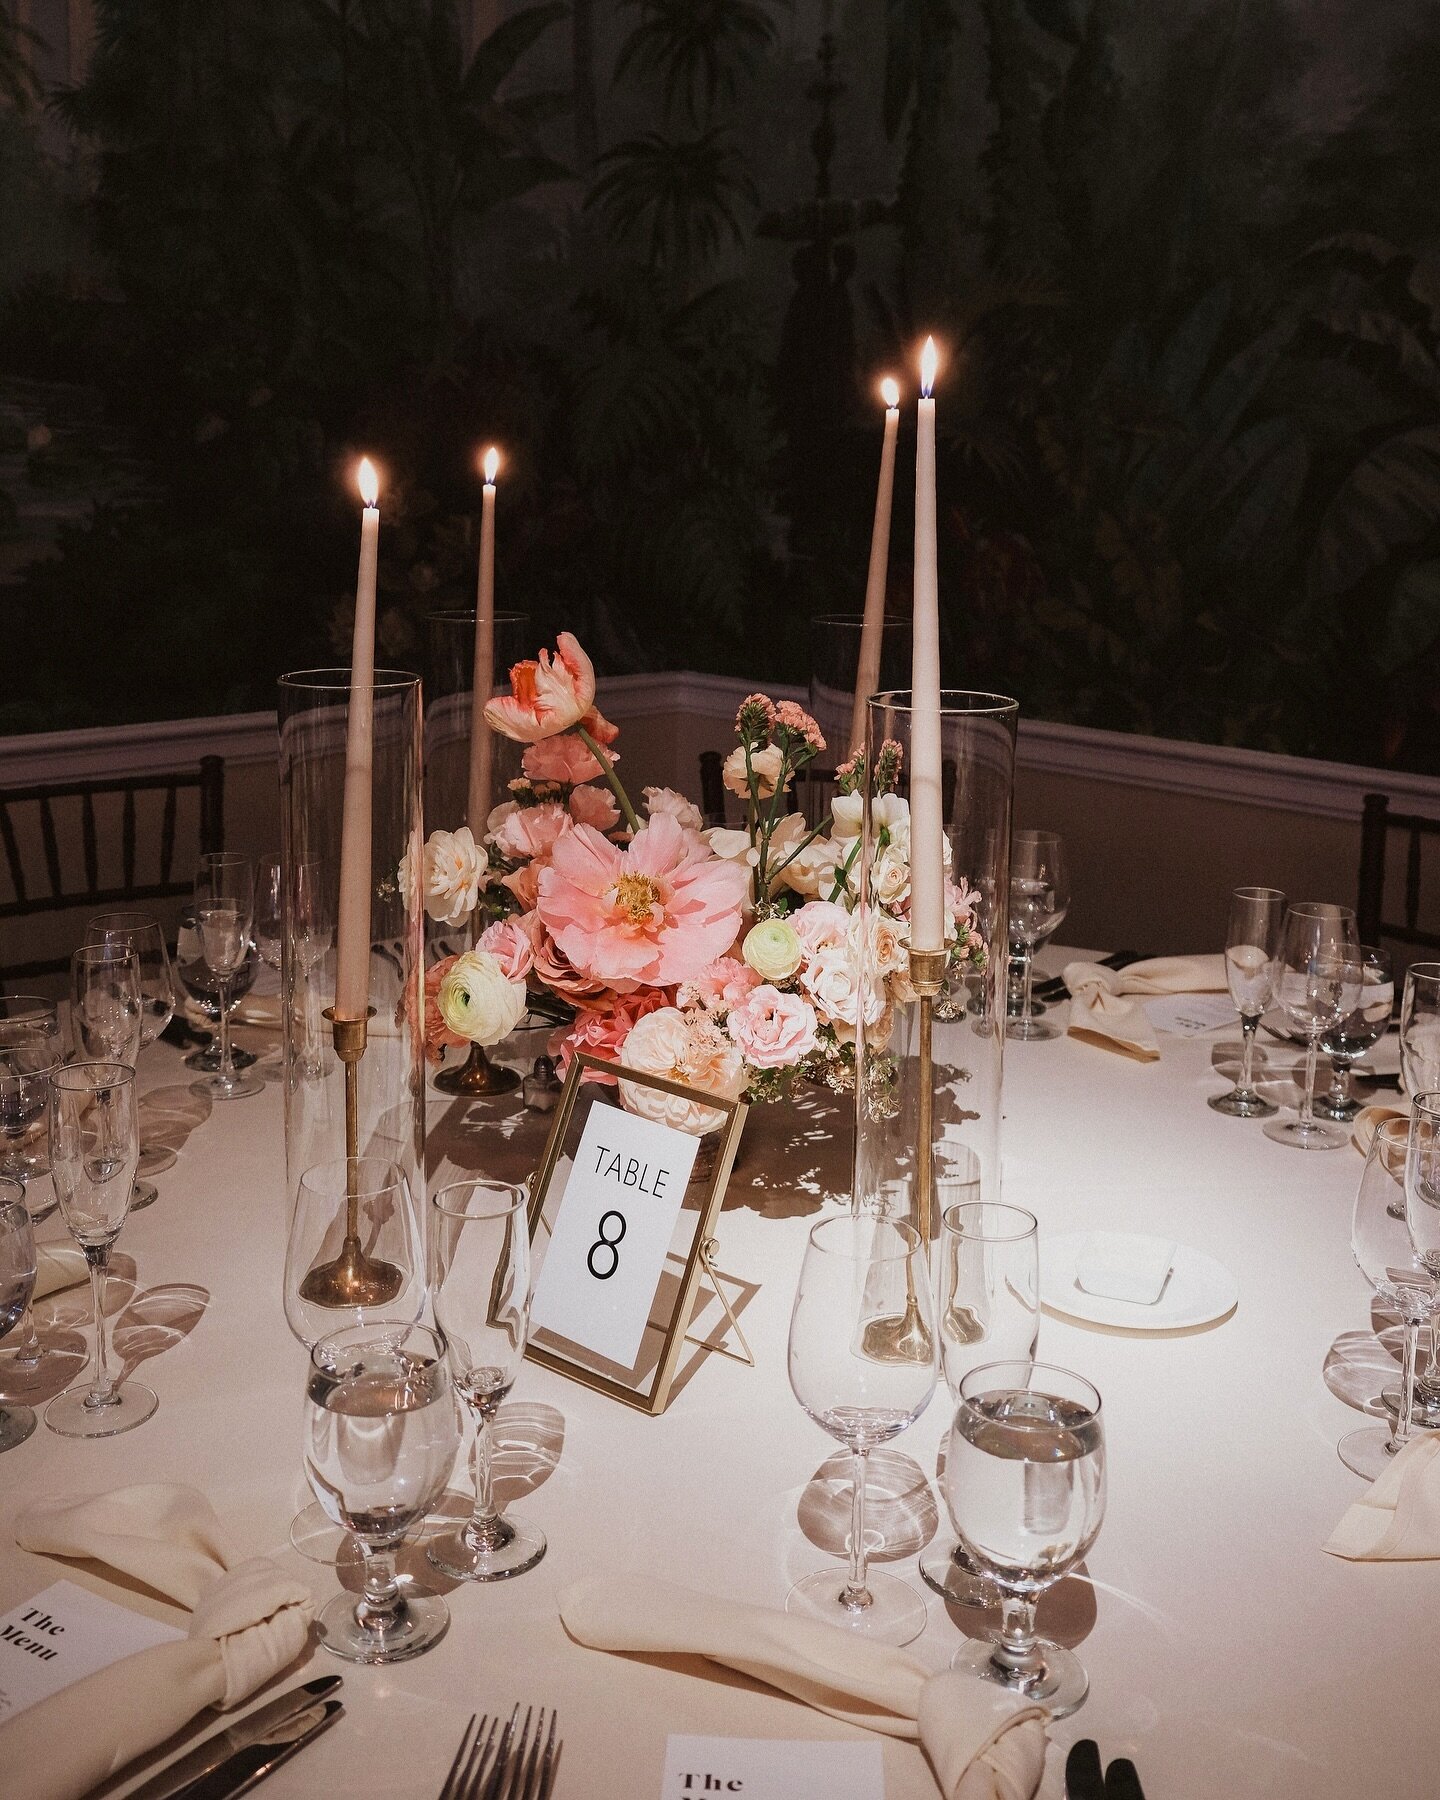 Pops of pink to celebrate Valentine&rsquo;s Day 💗 

Planner @mileenzarinevents
Photographer @faroutfeeling 
Venue @nybg
Catering @byconstellation 
Florals @designsbyahnnyc
Client @cherrydipped @kevinslovak2